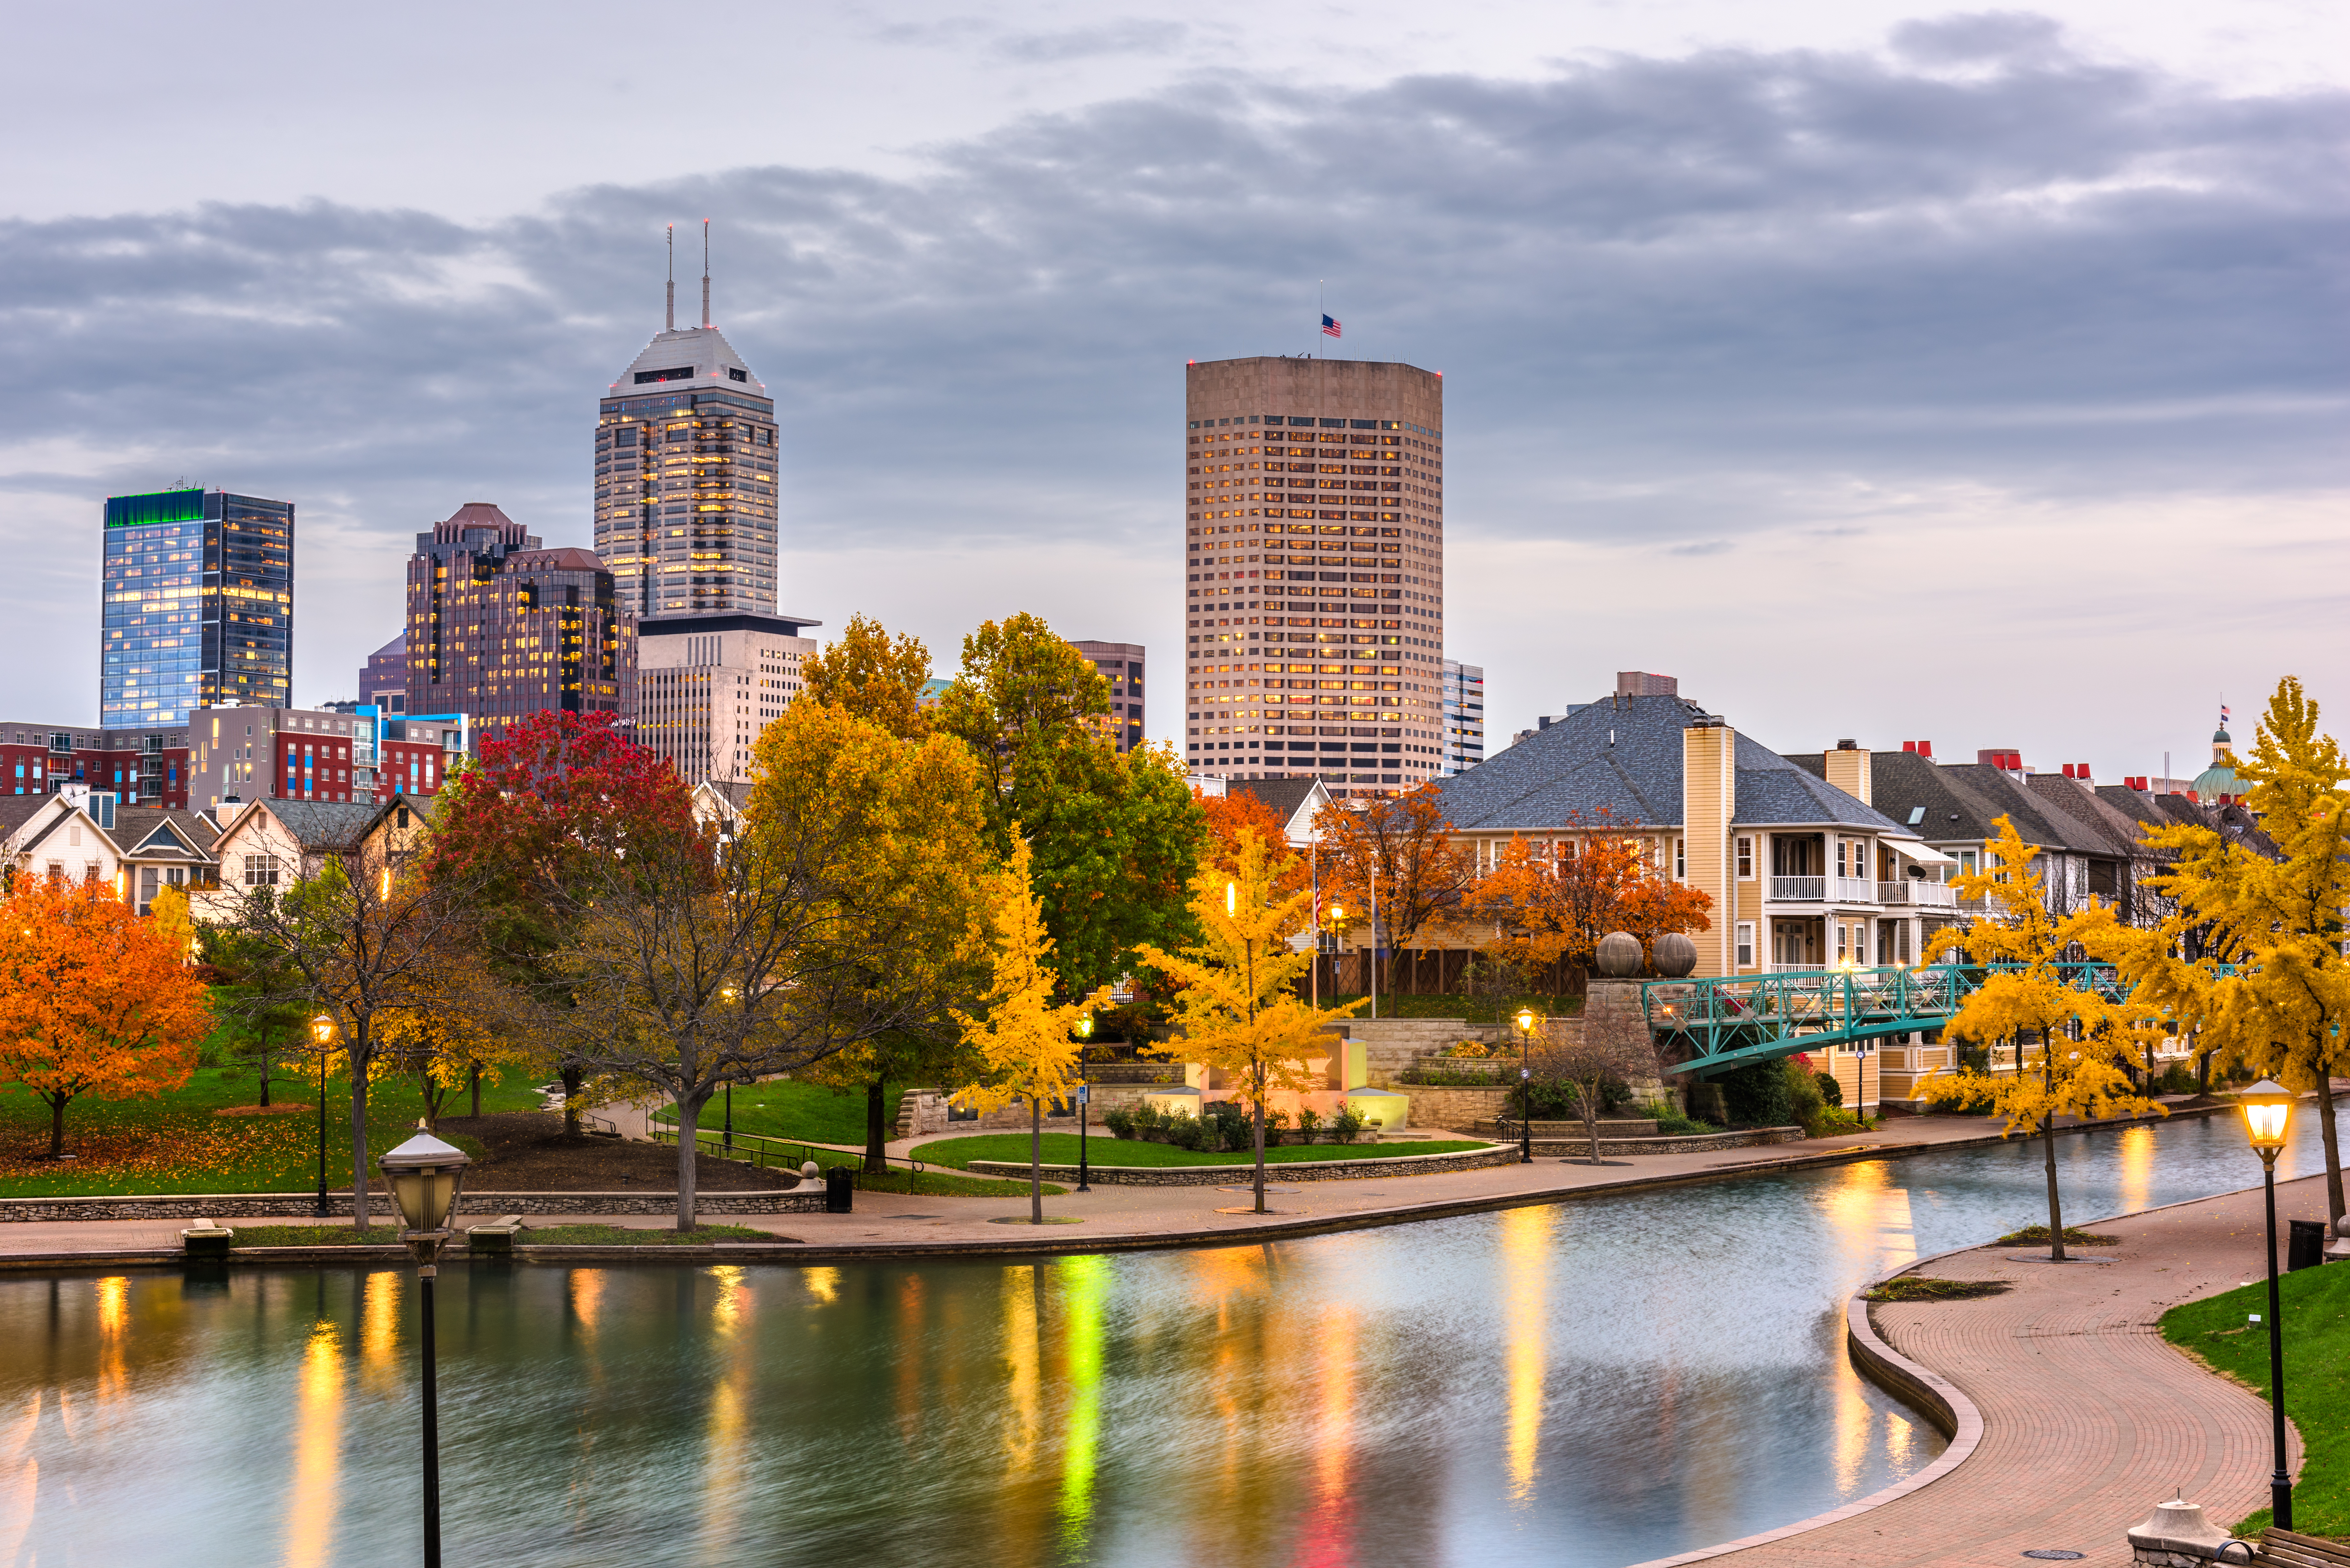 How To See Indianapolis on a Budget